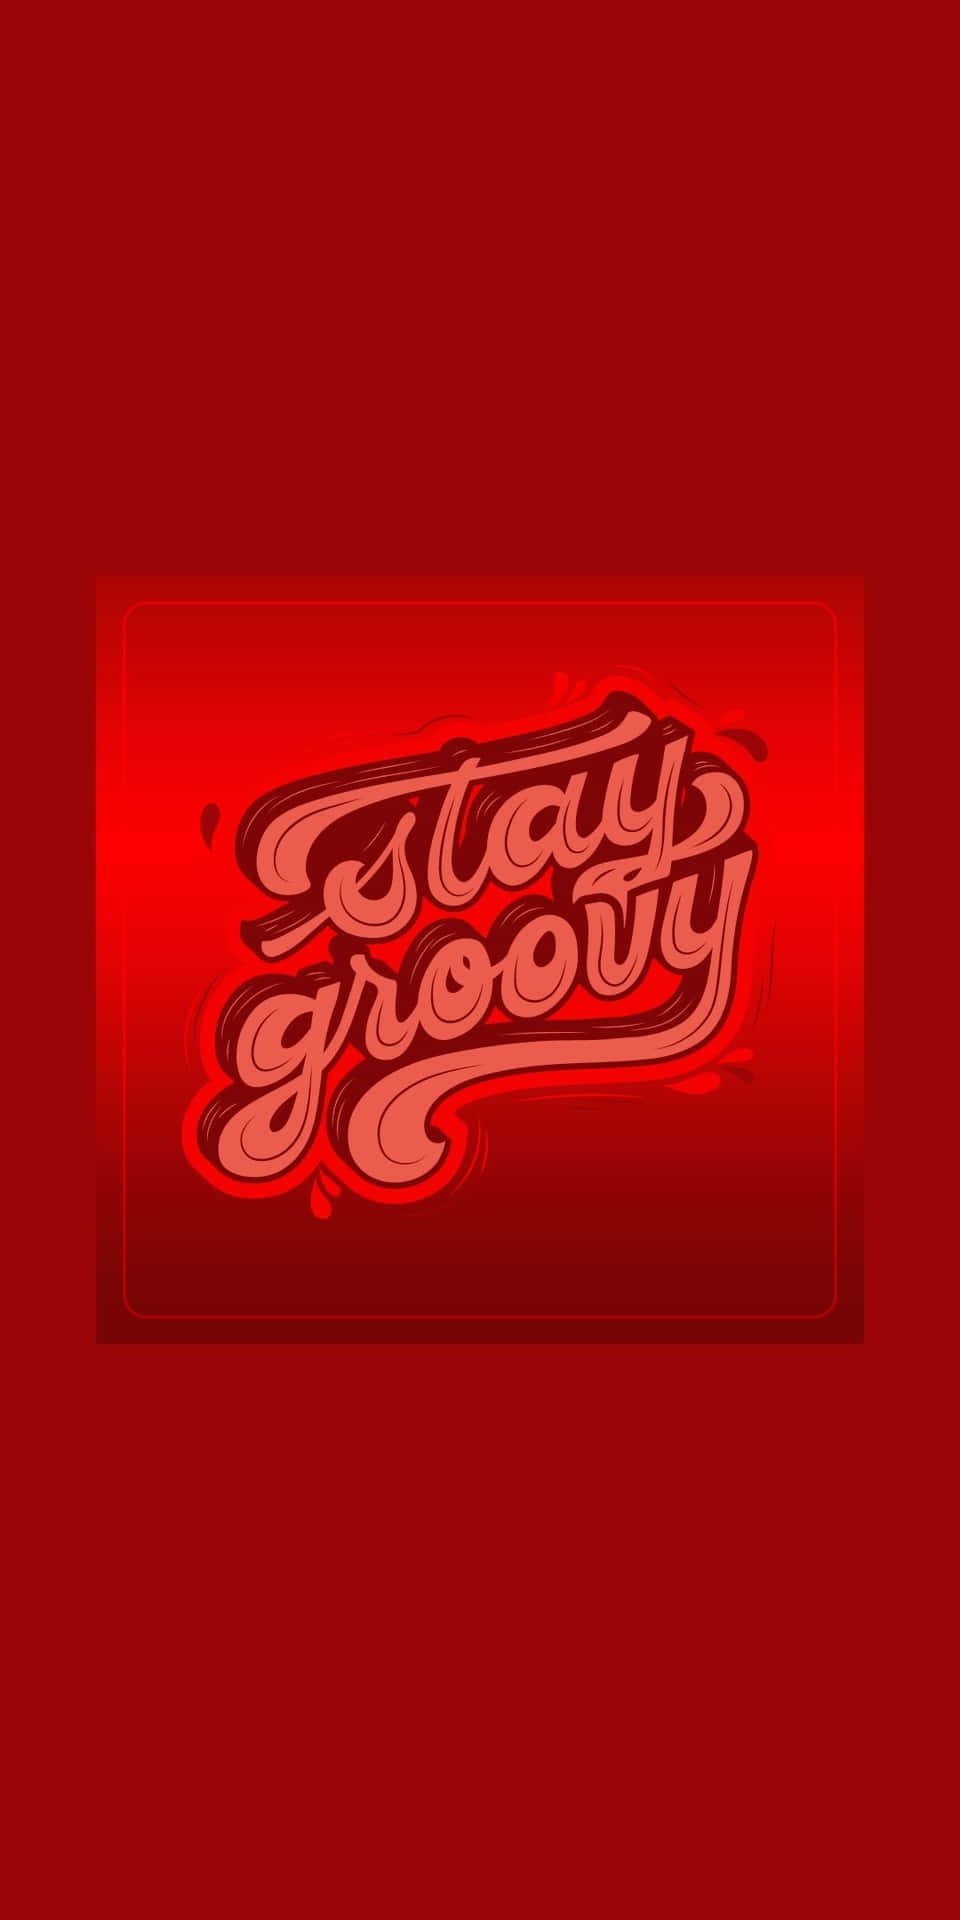 Stay Groovy Typography Red Gradient Background